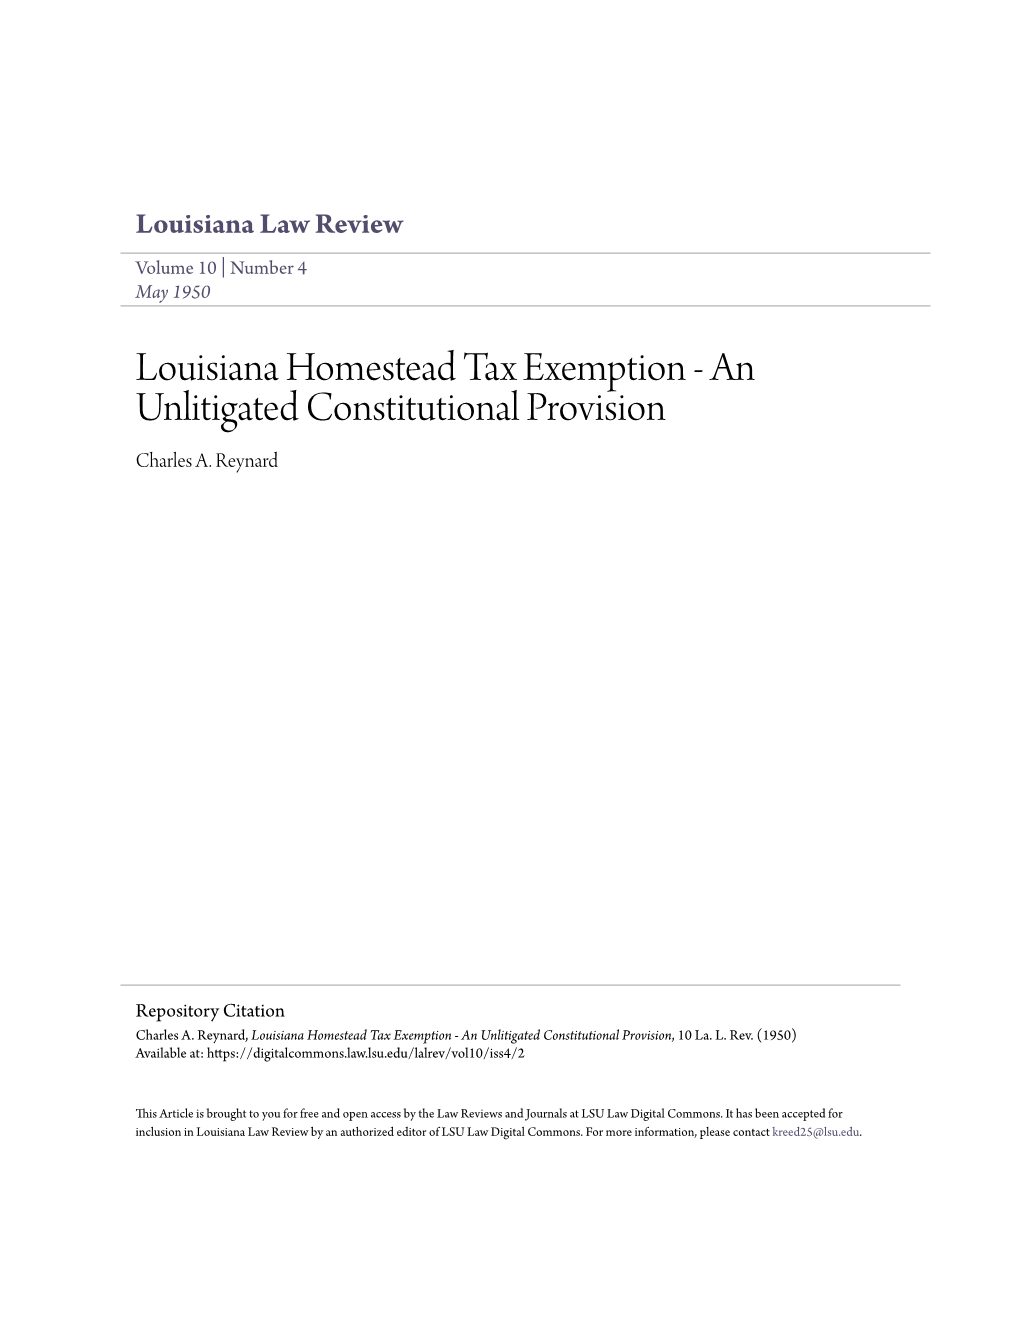 Louisiana Homestead Tax Exemption - an Unlitigated Constitutional Provision Charles A